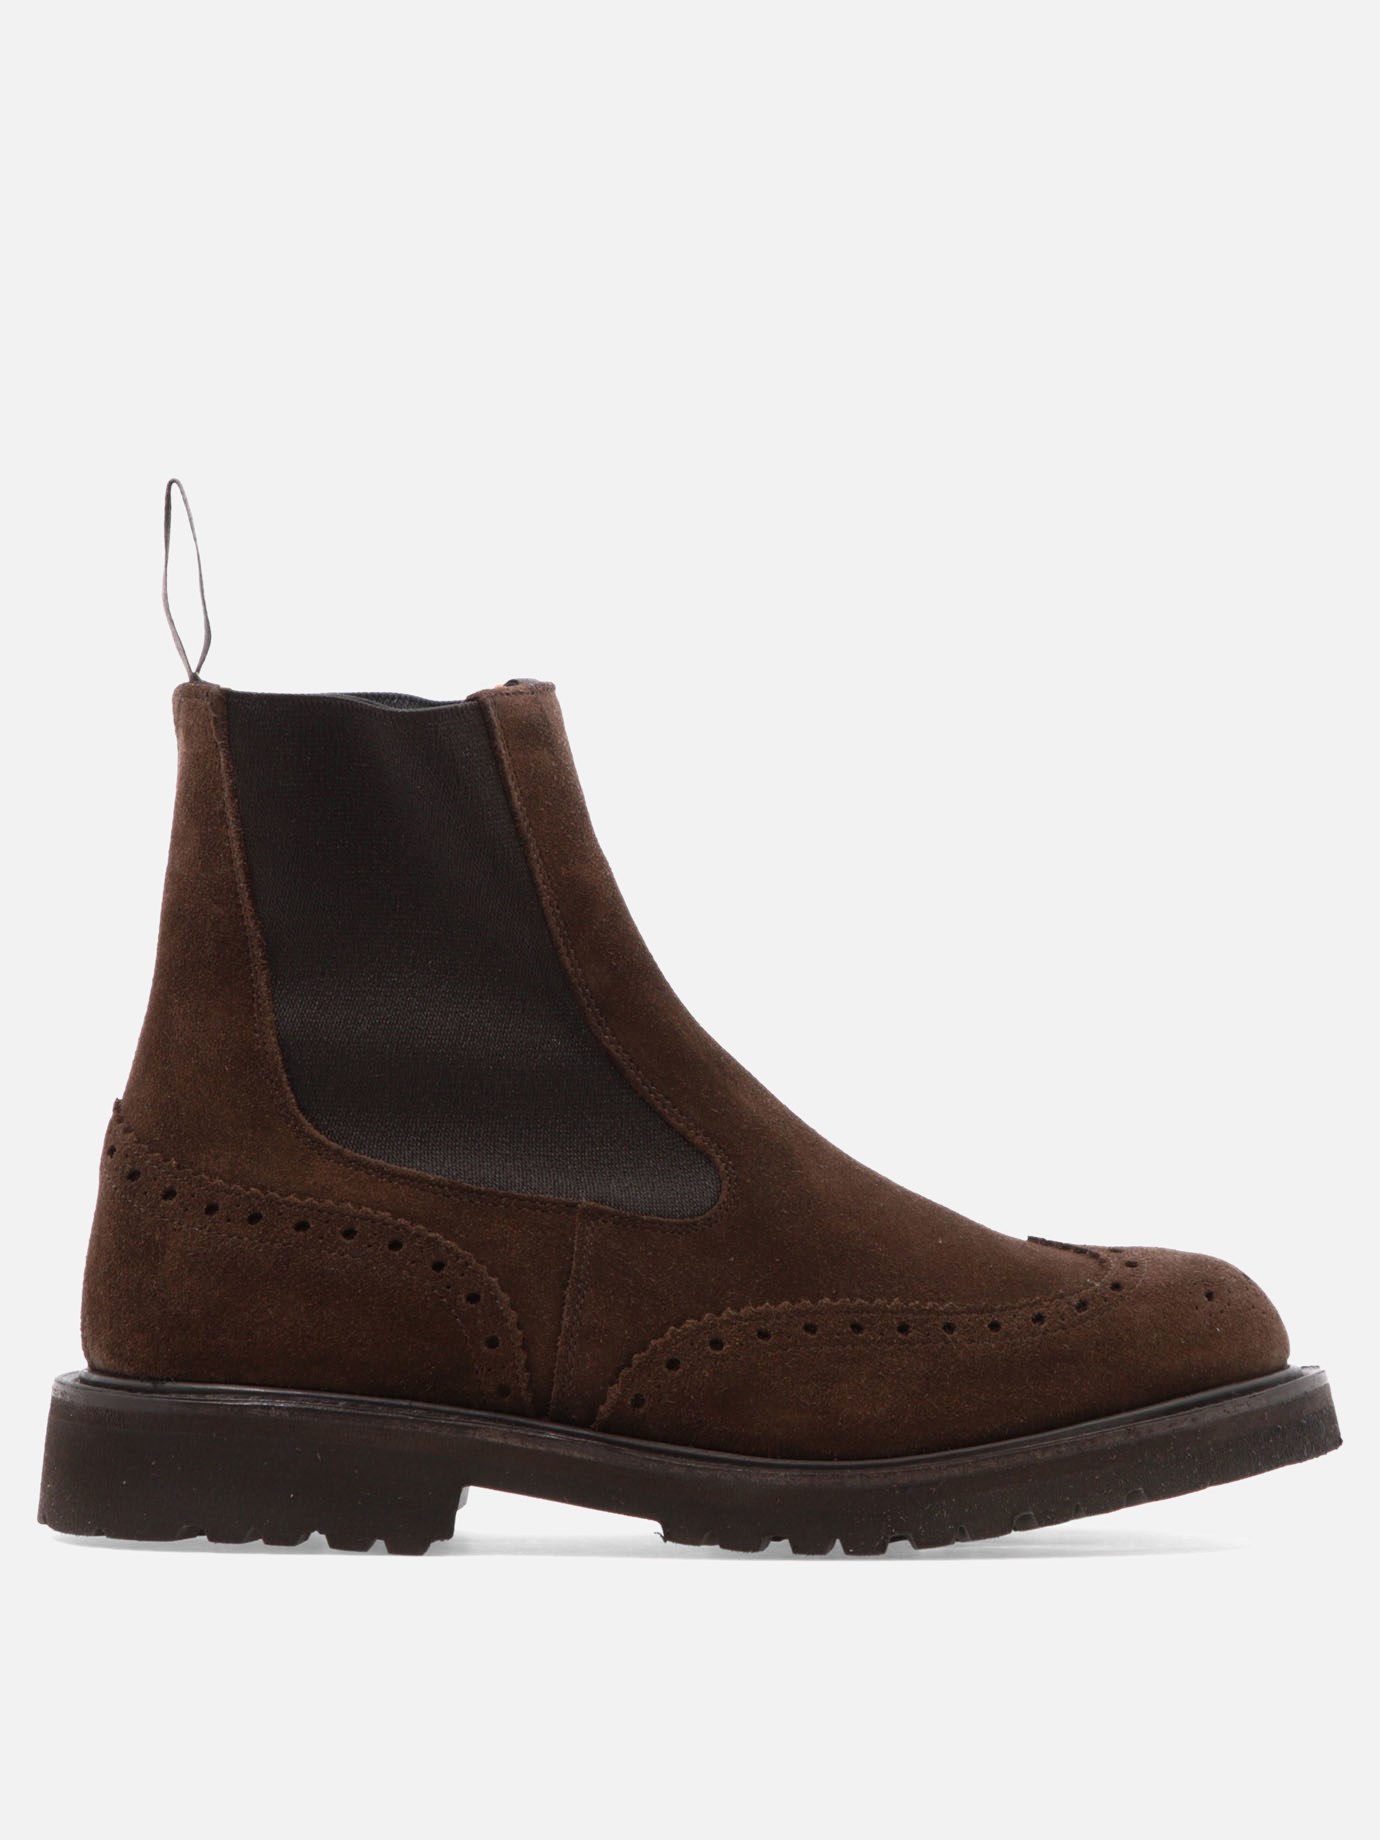  Silvia  ankle bootsby Tricker's - 1